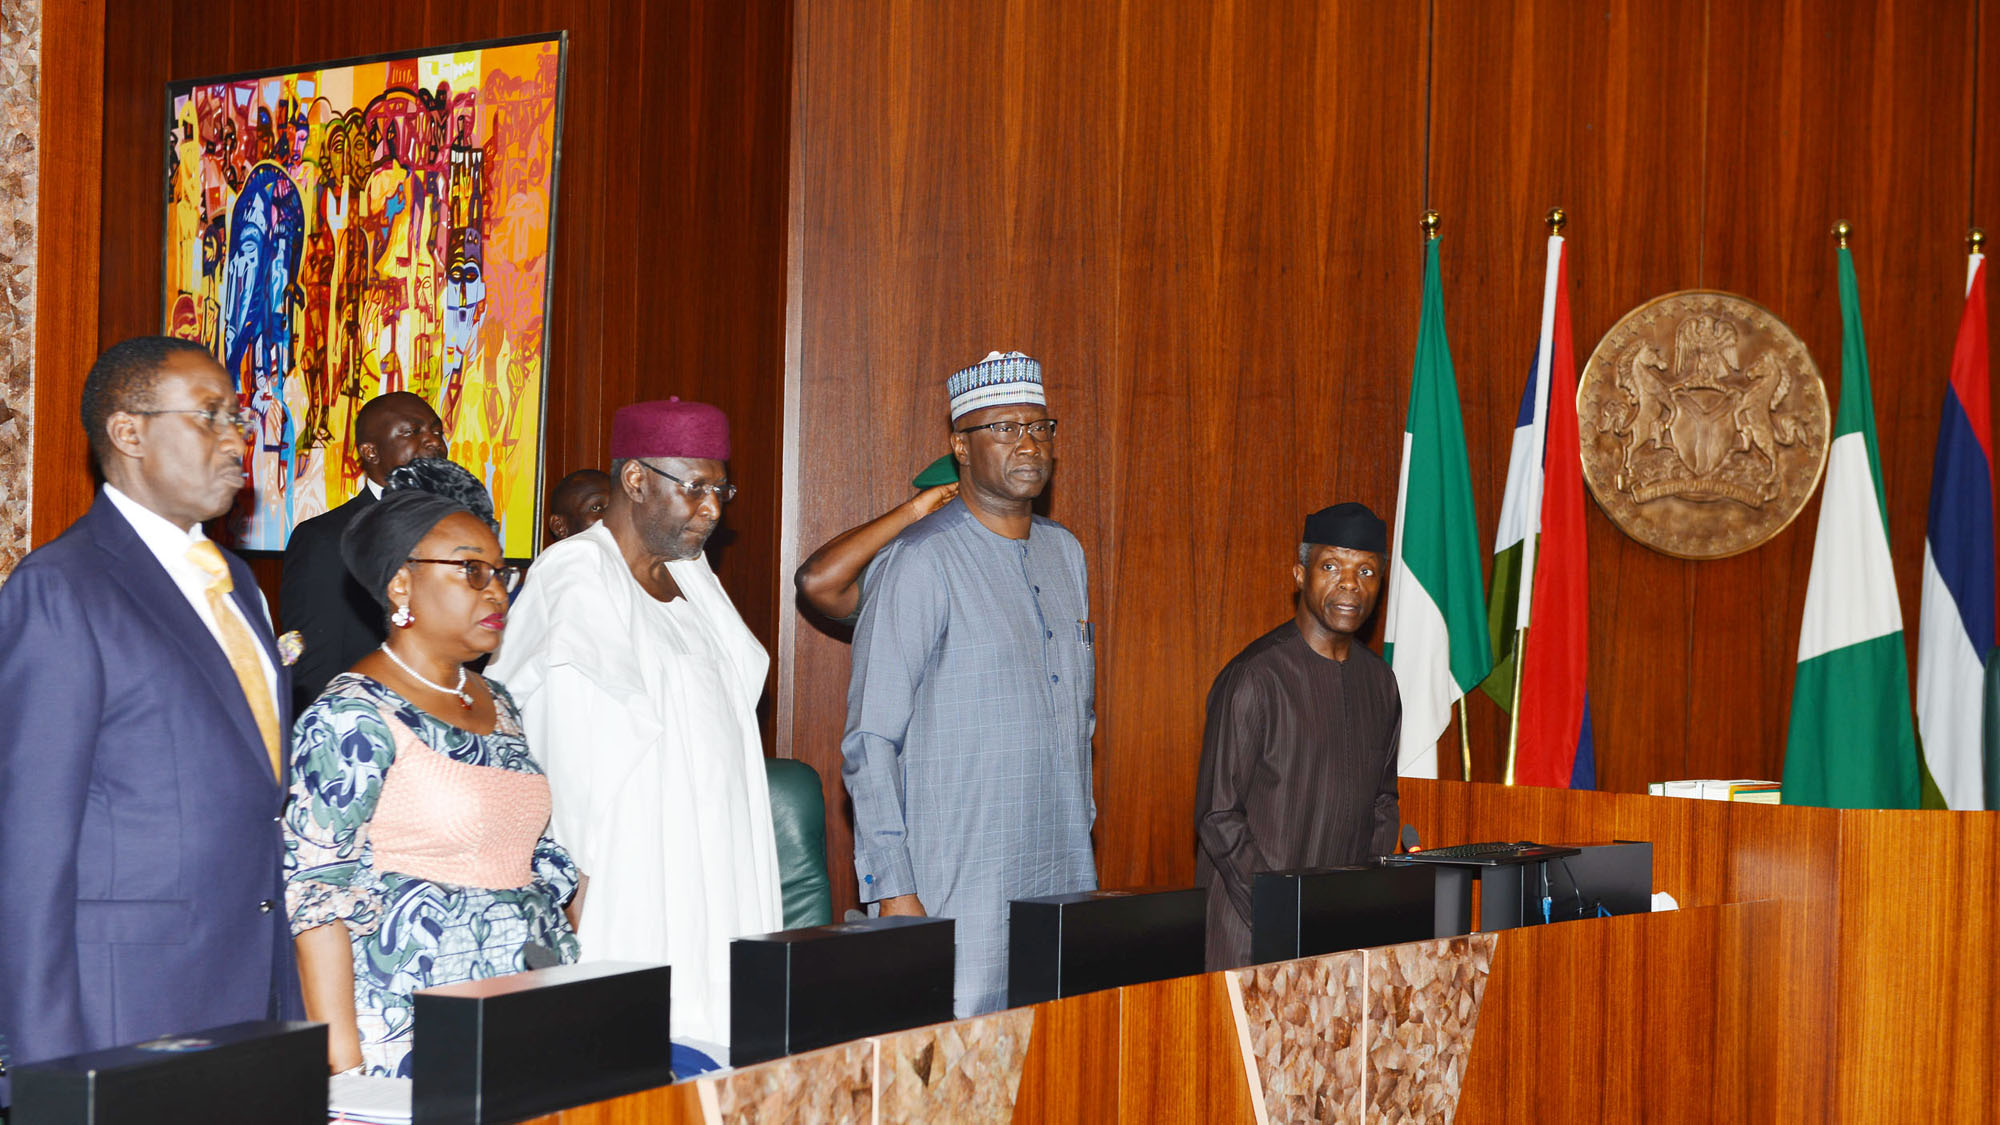 From left: National Security Adviser, retired Maj.-Gen. Babagana Monguno; Head of Civil Service of the Federation, Winifred Oyo-Ita; Chief of Staff to the President, Abba Kyari; Secretary to the Government of the Federation, Boss Mustapha and Acting President Yemi Osinbajo, during the Federal Executive Council Meeting at the Presidential in Villa in Abuja on Wednesday ( 15/8/18). 04386/15/8/2018/Sumaila Ibrahim/JAU/NAN